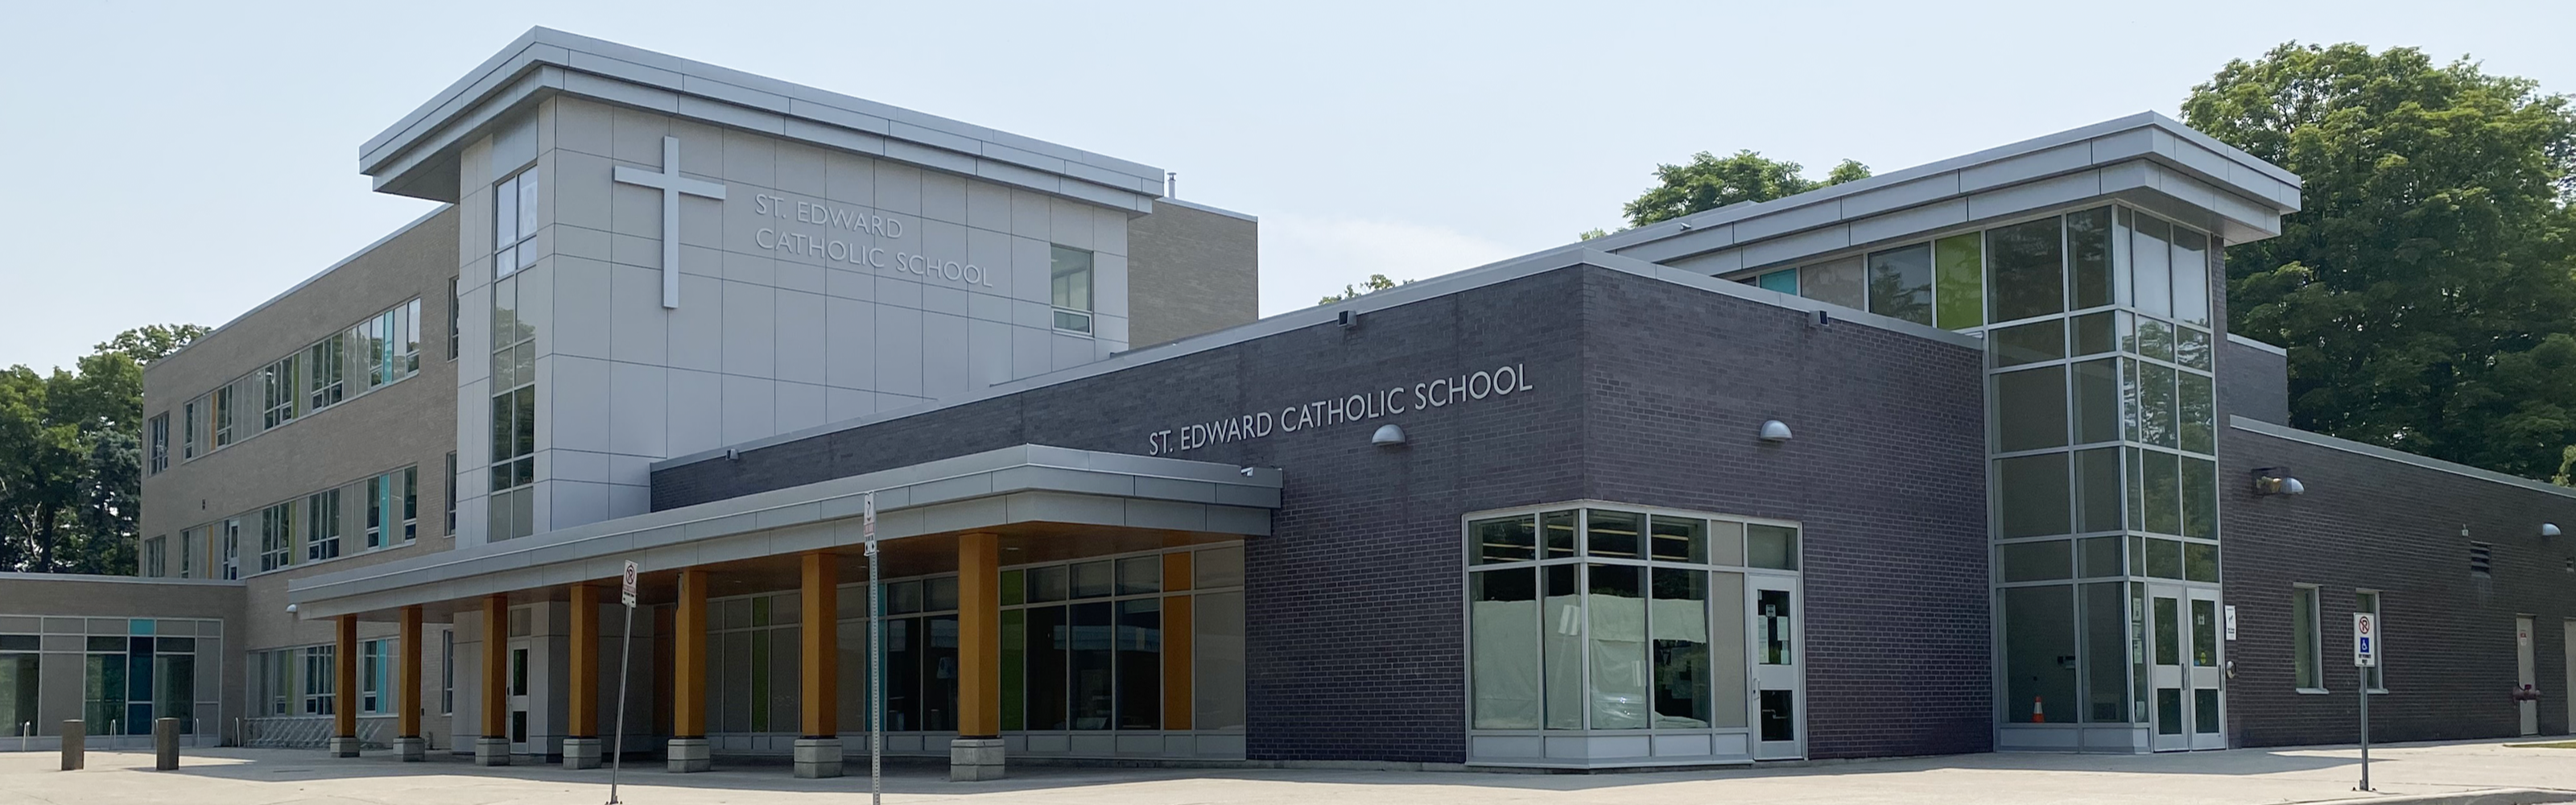 The front of the St. Edward Catholic School building.